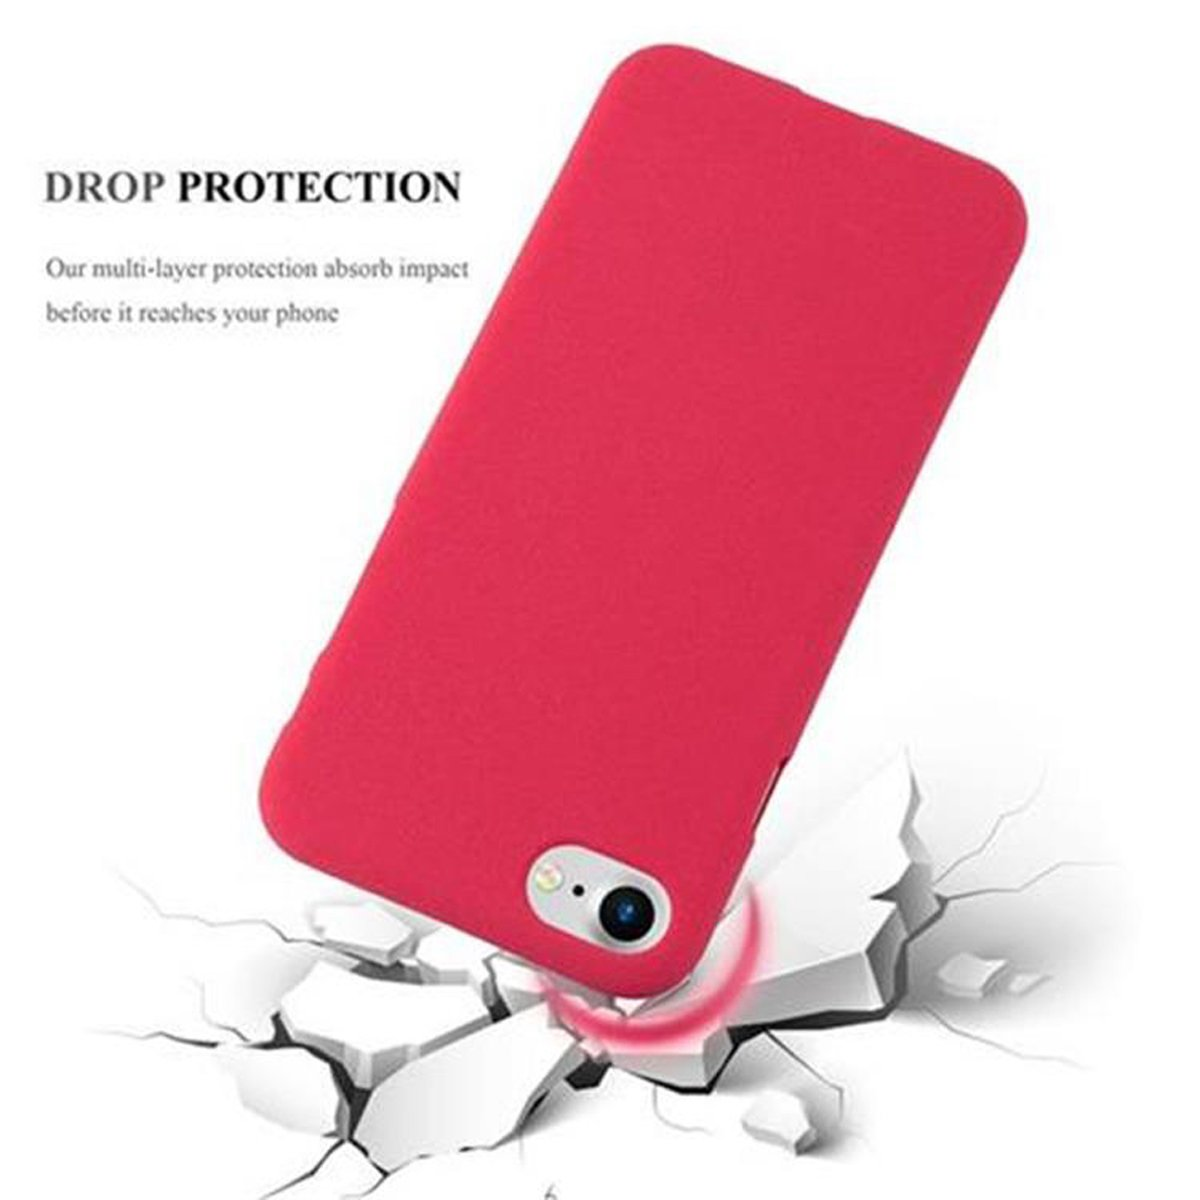 CADORABO TPU Backcover, Apple, 7 7S Frosted / SE 2020, / ROT FROST iPhone / 8 Schutzhülle